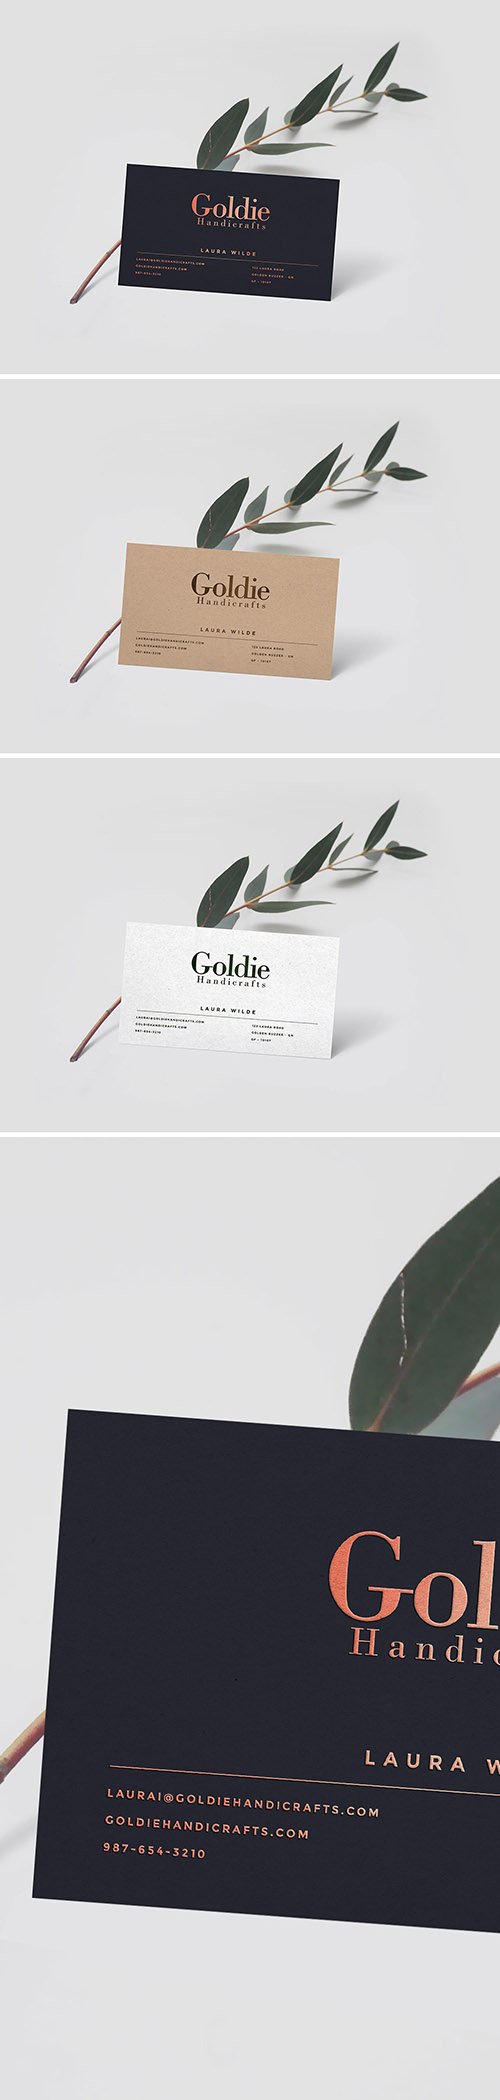 PSD Mock-Up - Realistic Business Card